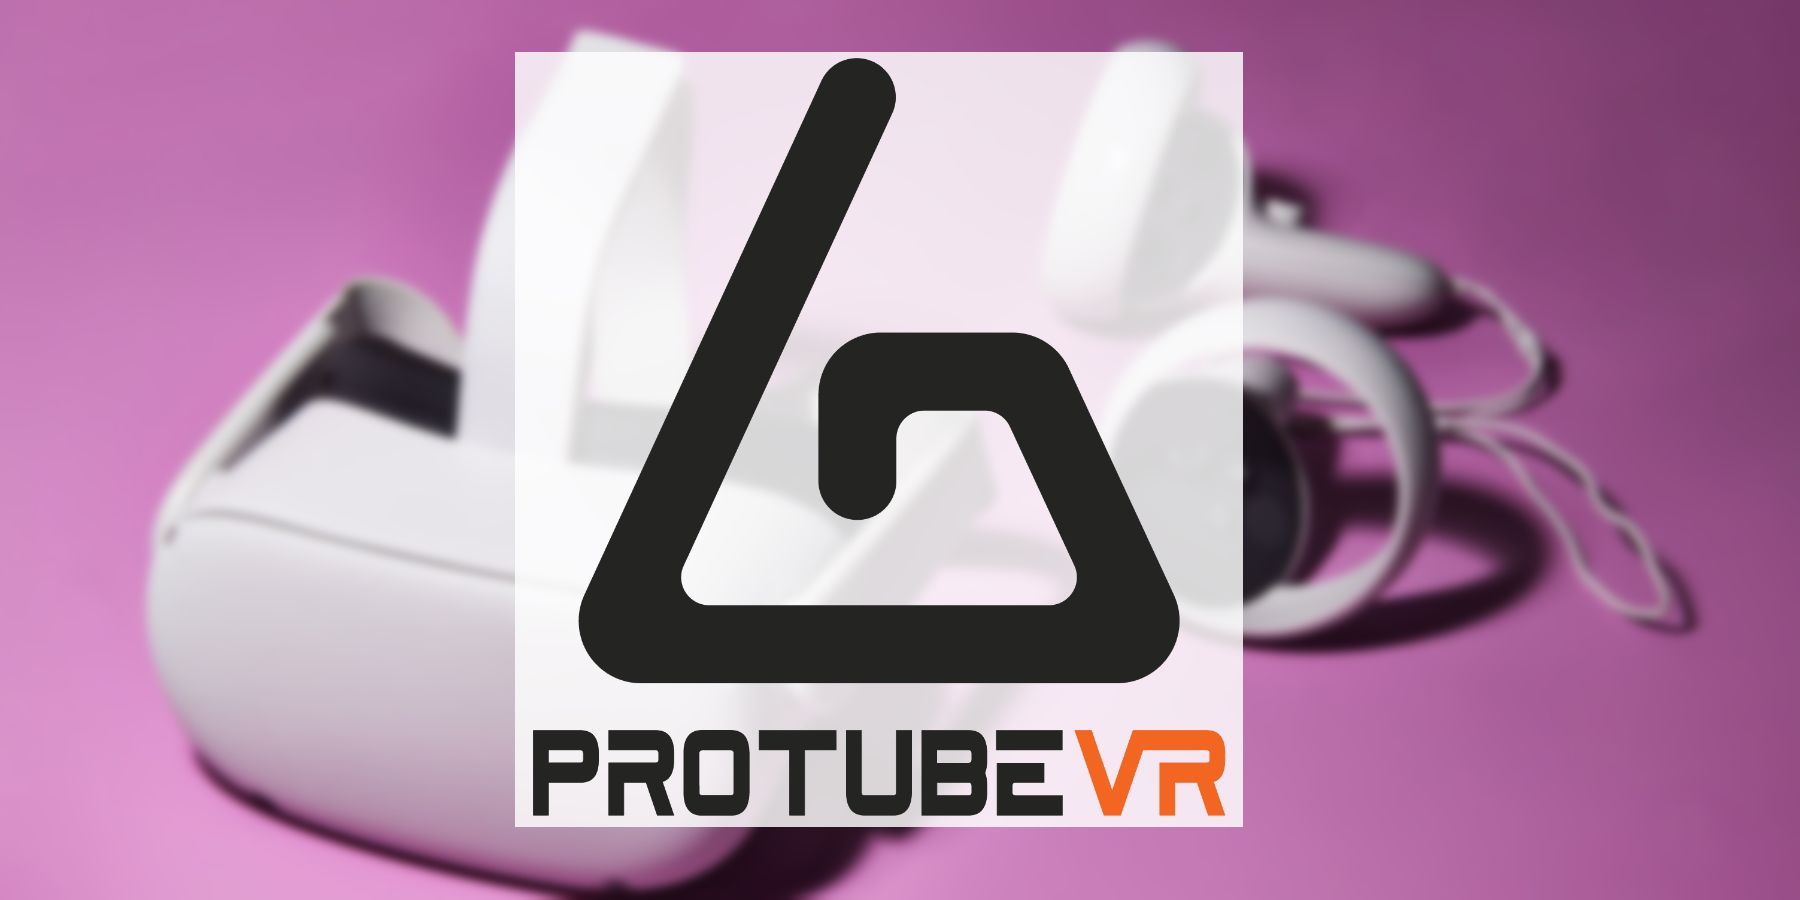 protube-vr-accessory-simulate-weapons